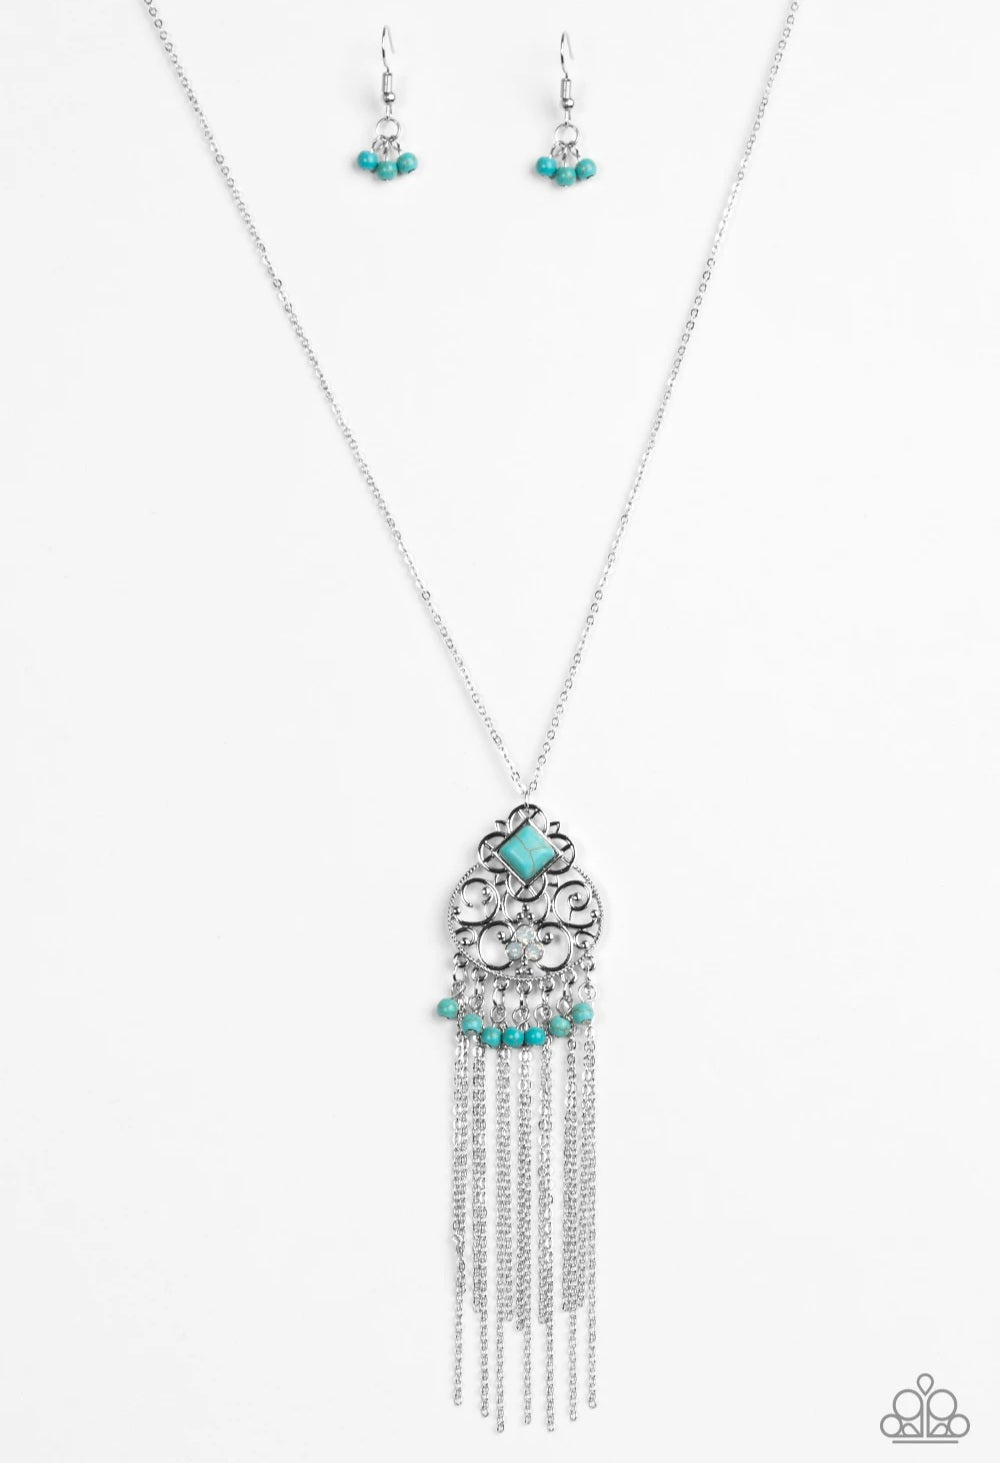 Whimsically Western Necklace Blue